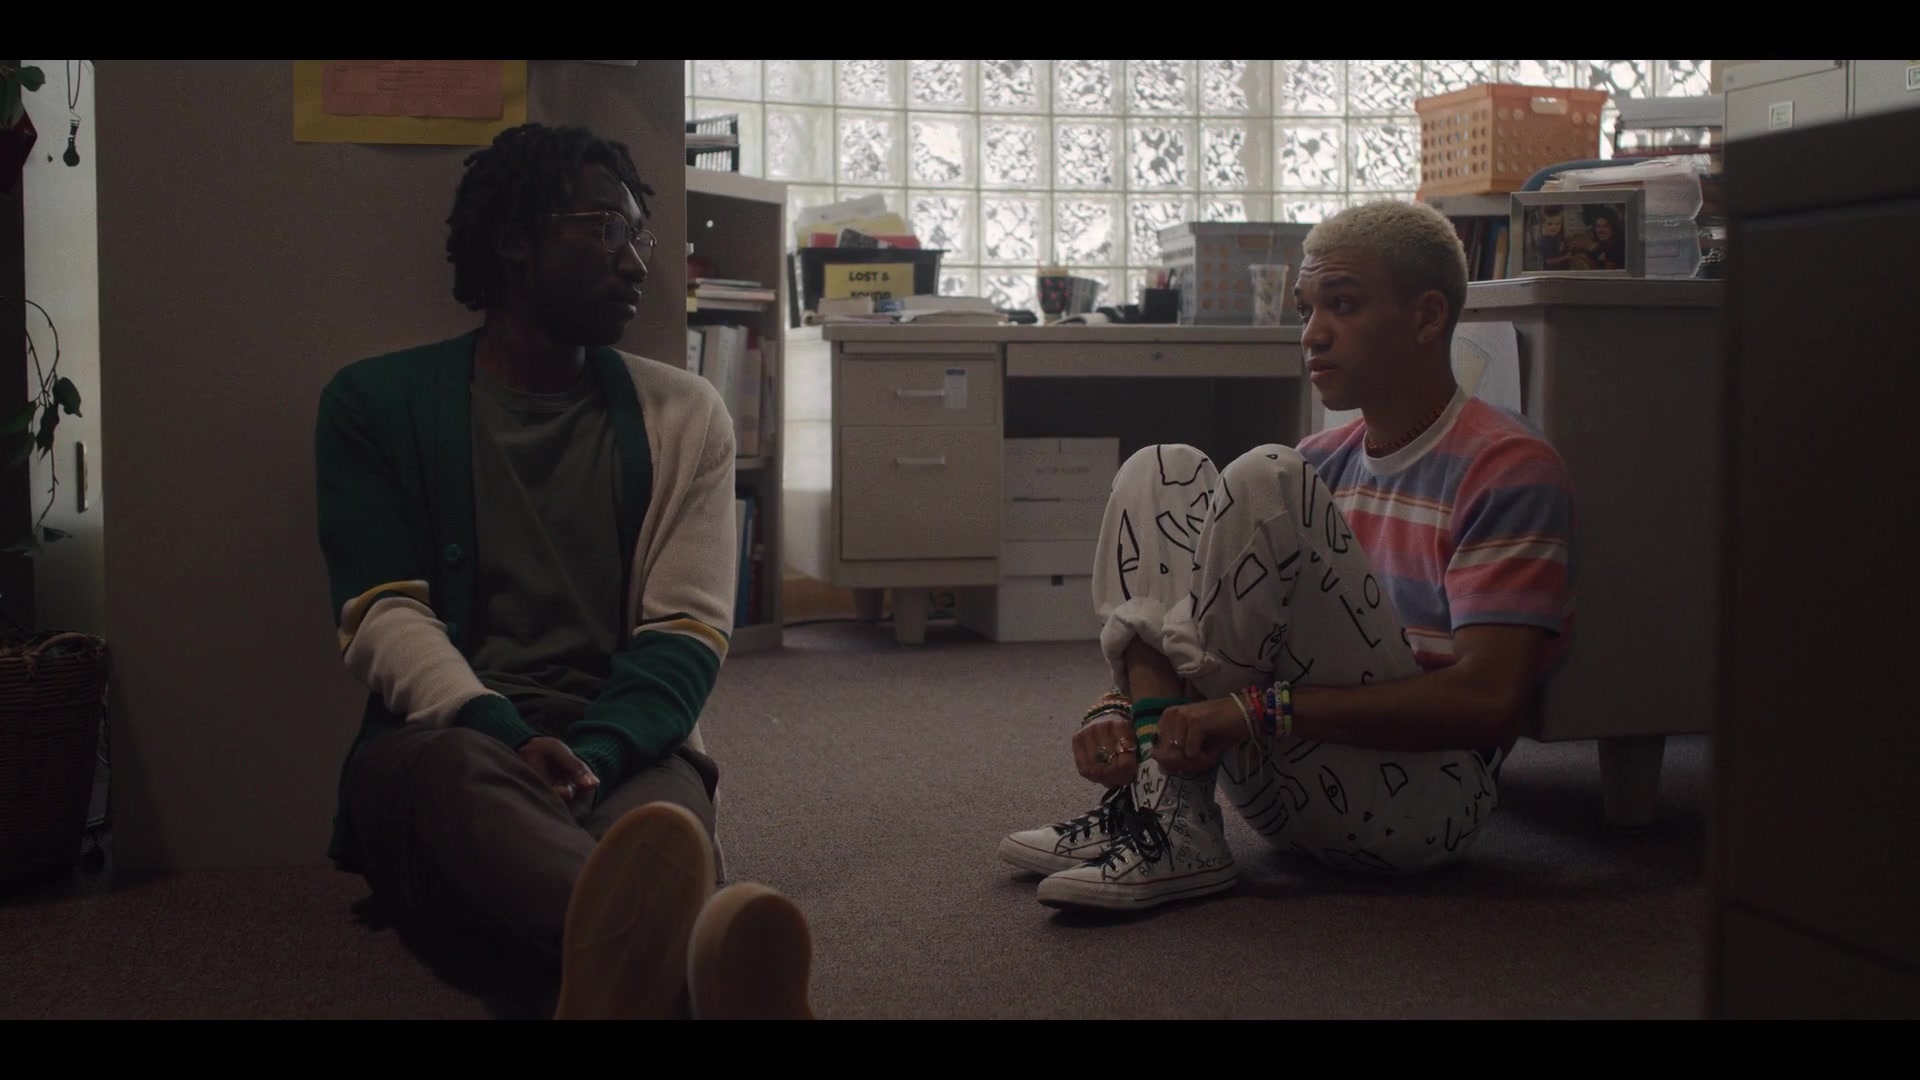 Converse Shoes Of Justice Smith As Chester In Generation S01E02 ... جوزاء